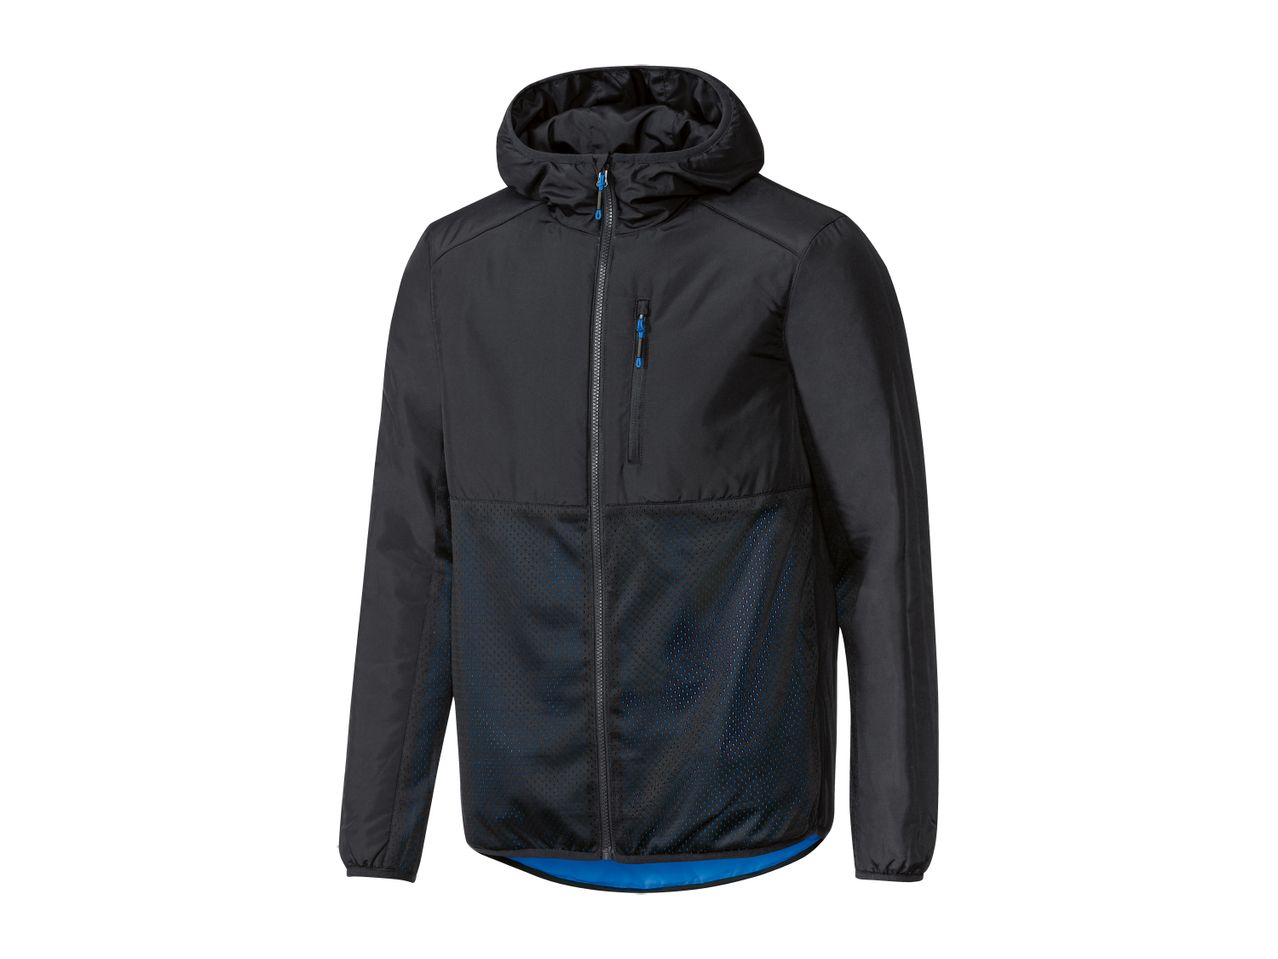 Go to full screen view: Crivit Men’s Reversible Cycling Jacket - Image 3